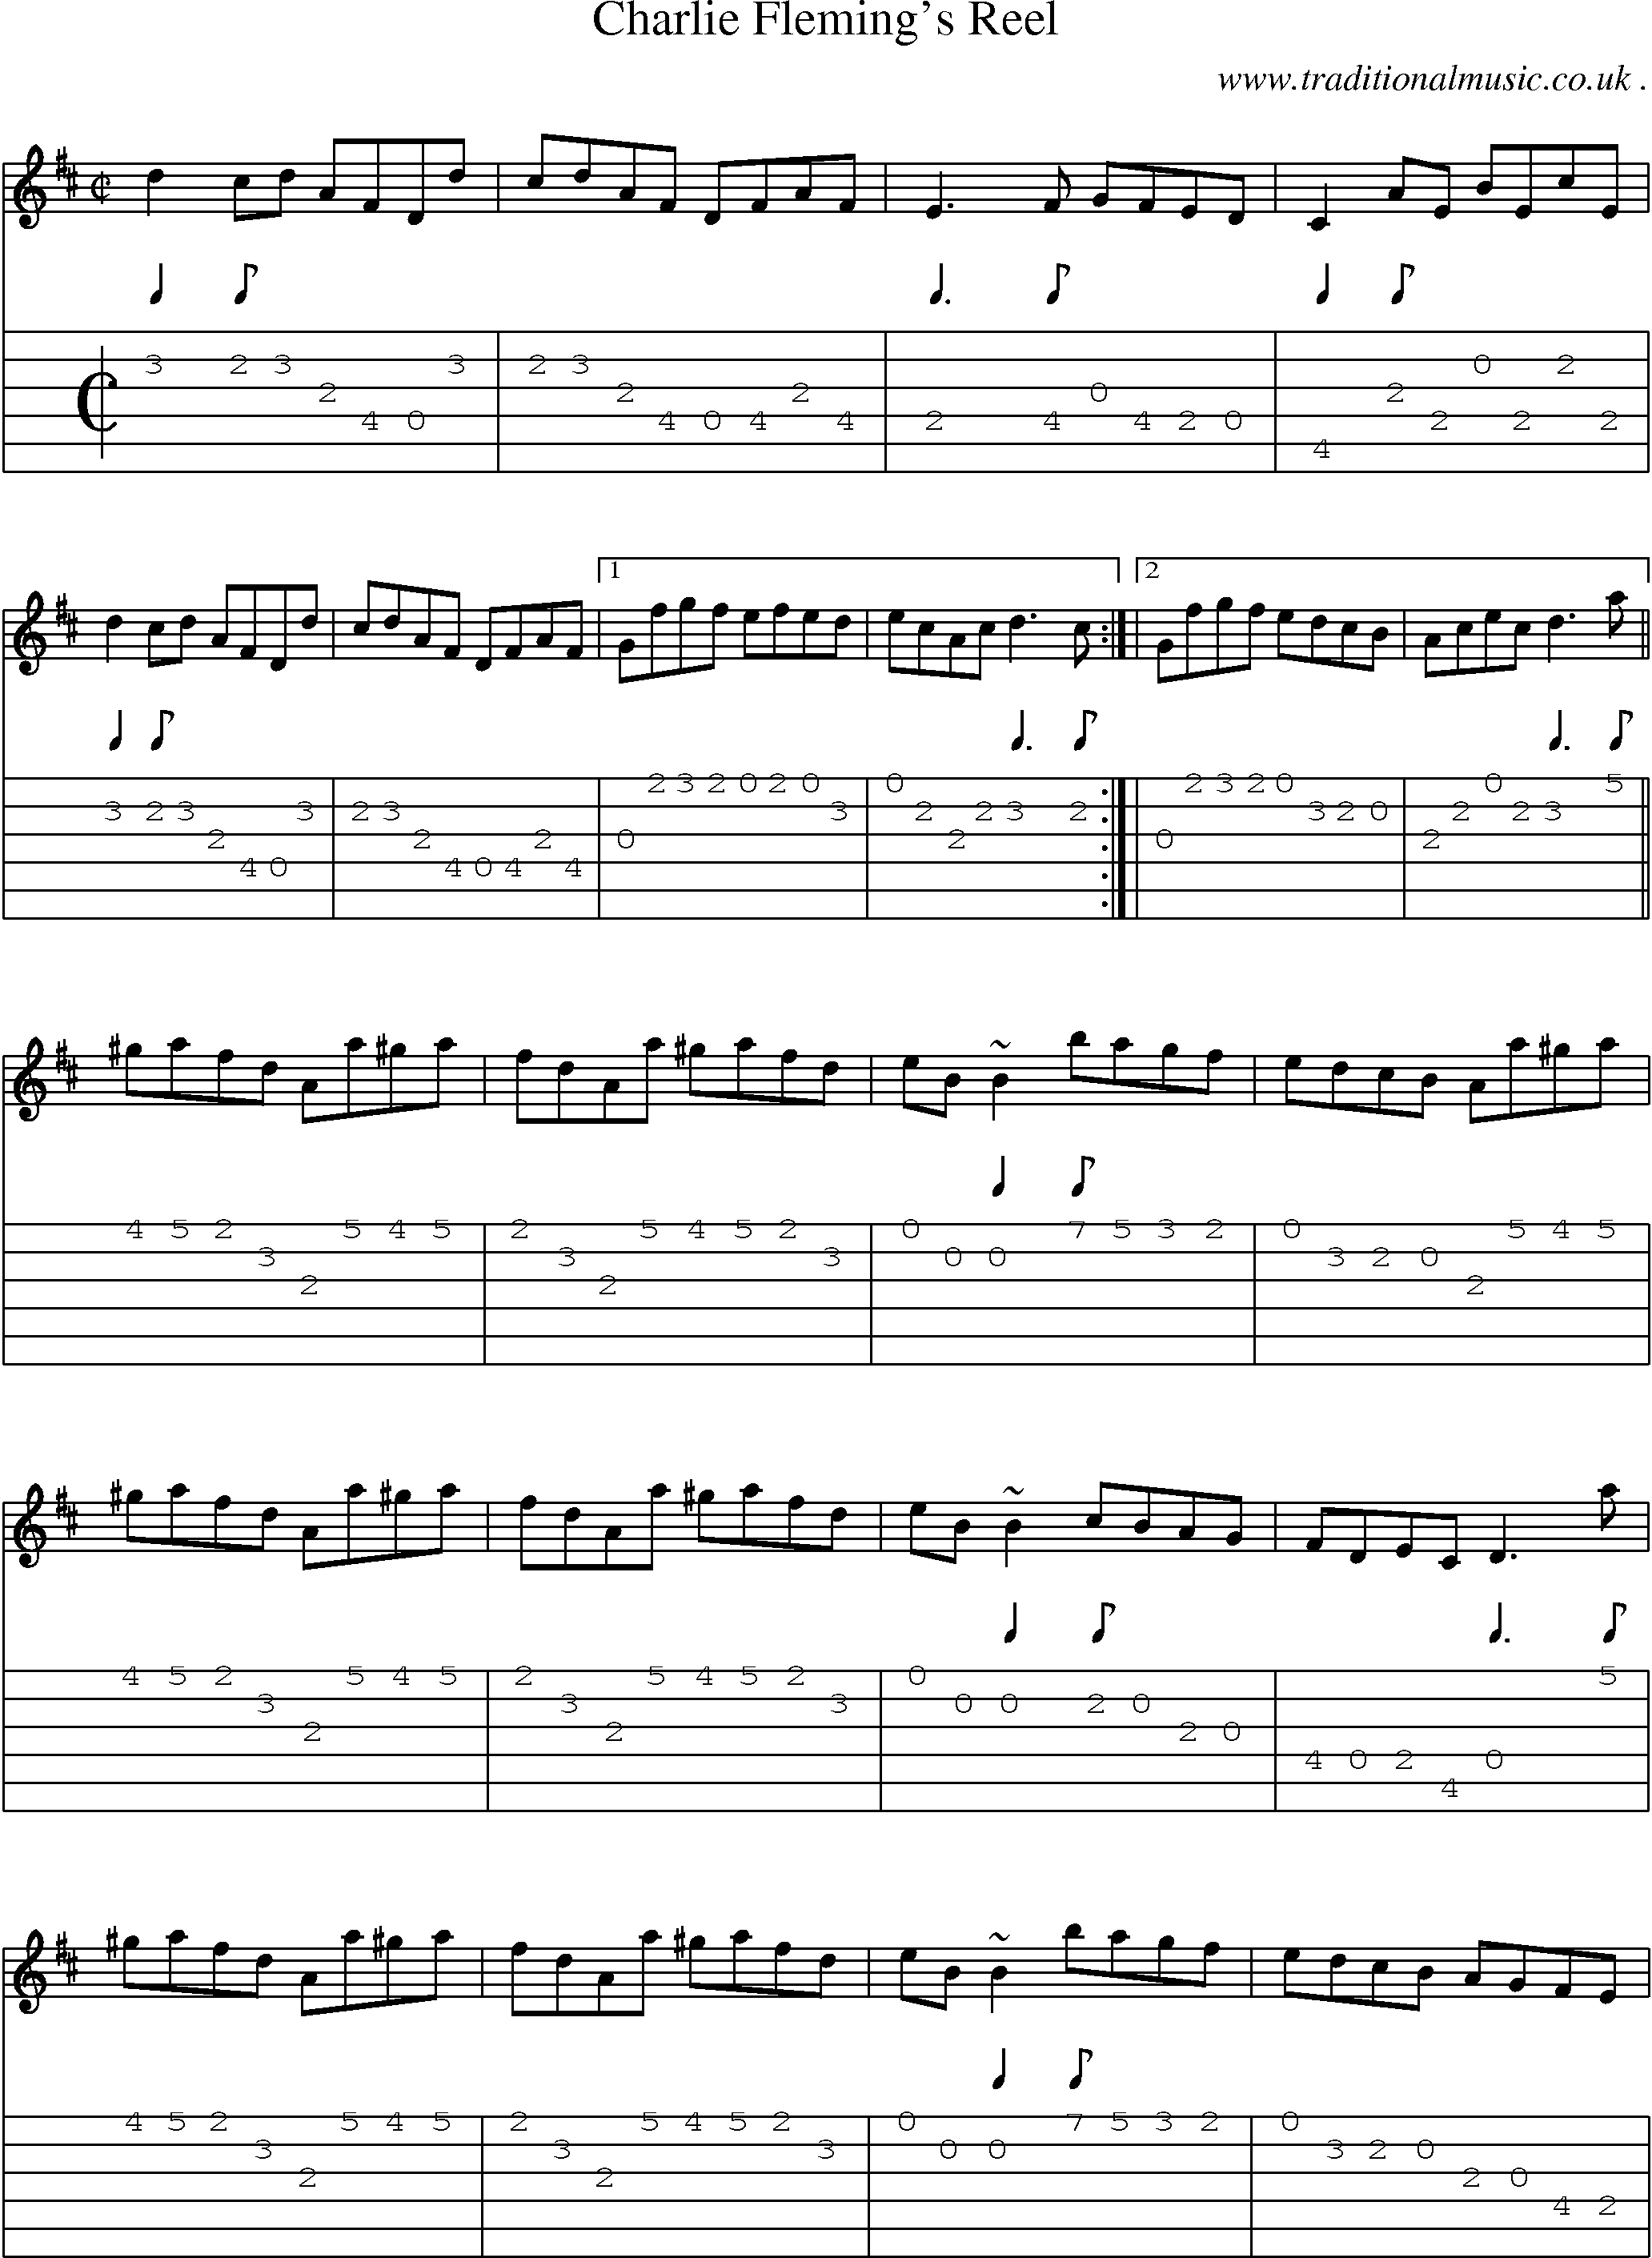 Sheet-music  score, Chords and Guitar Tabs for Charlie Flemings Reel